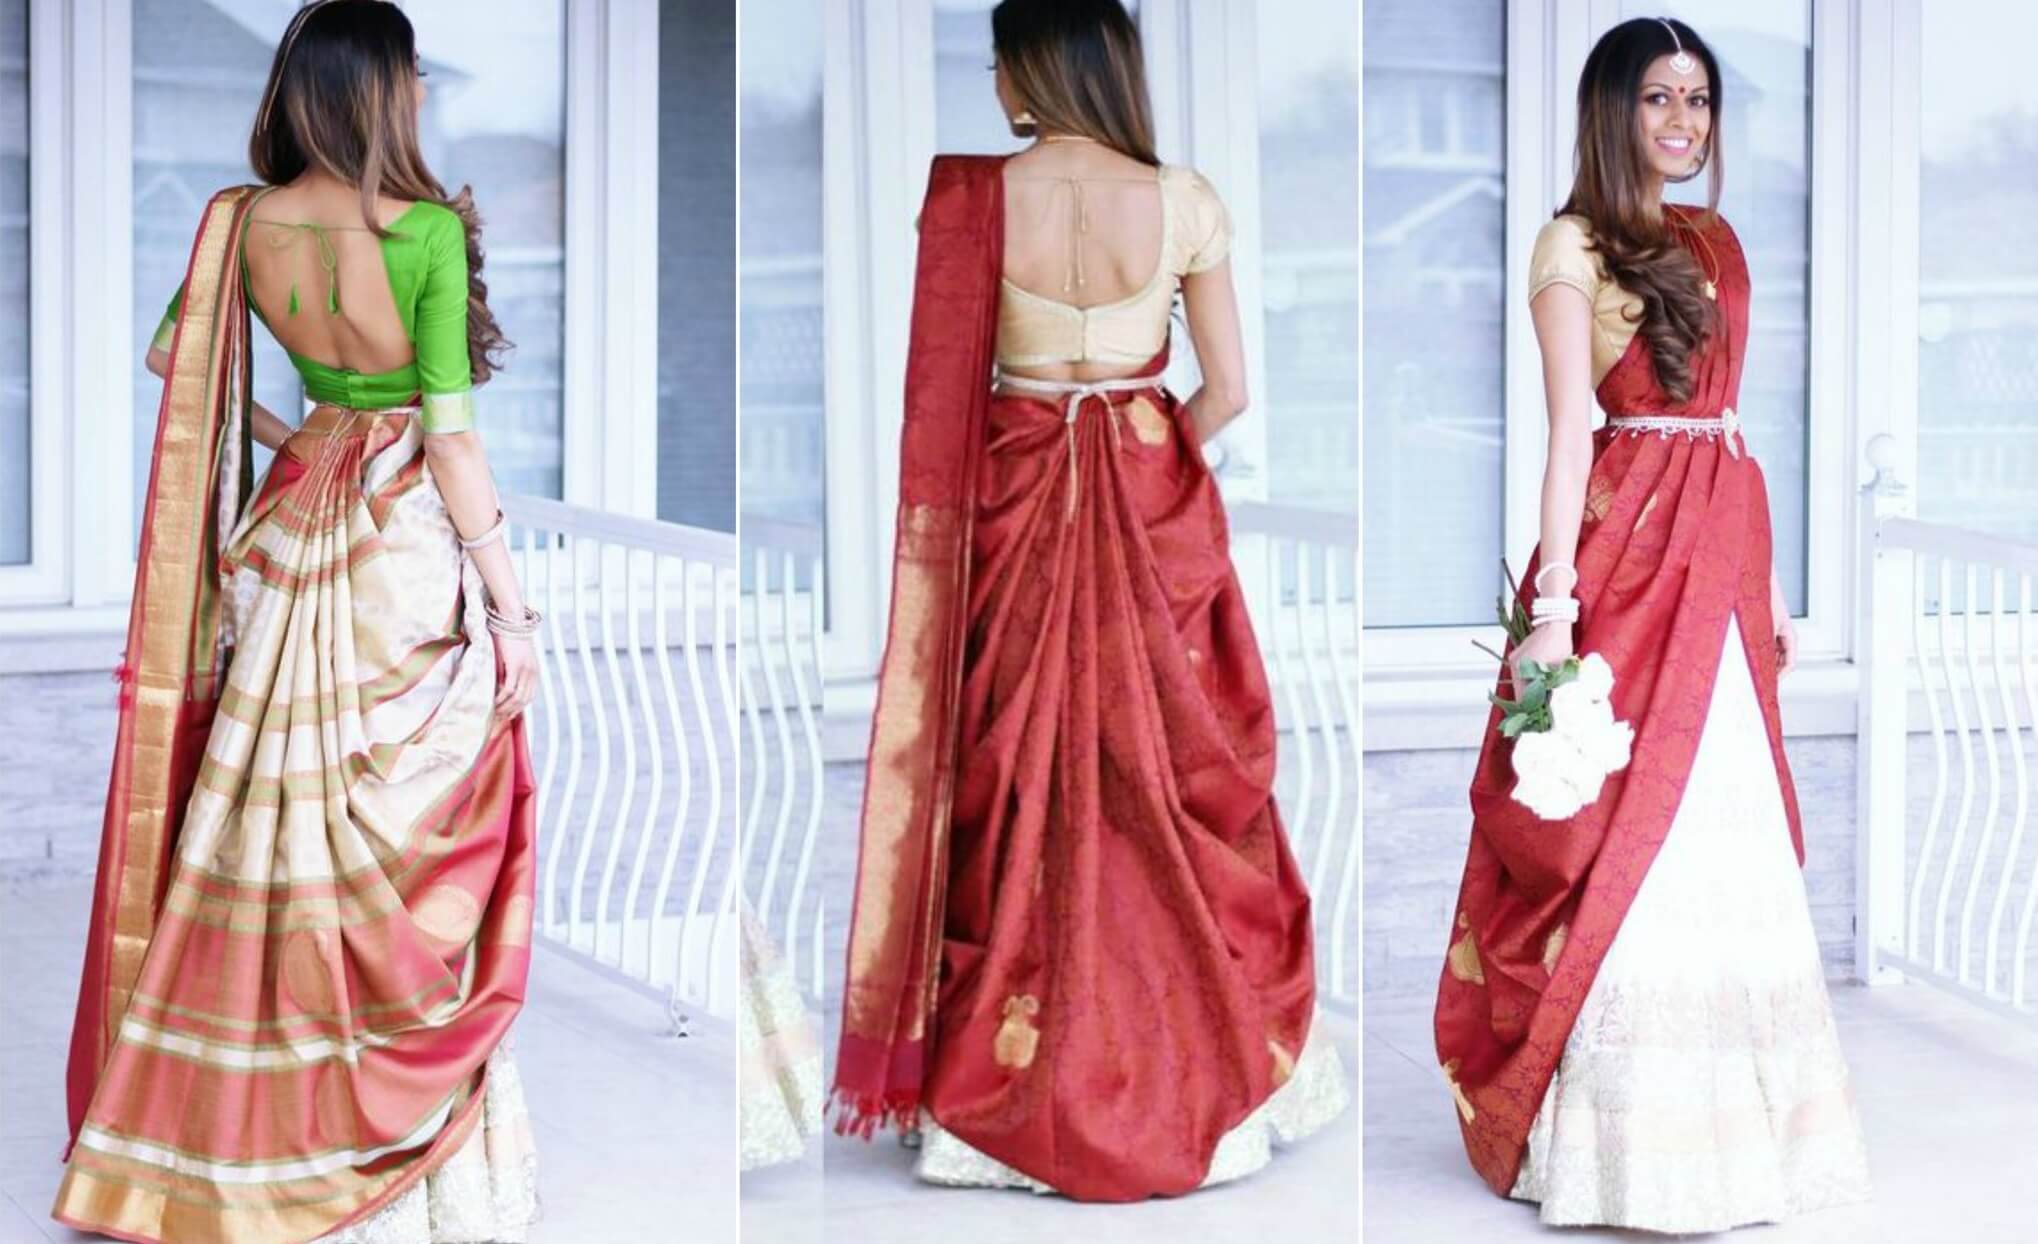 11 Styles of Saree Draping - Uniform Sarees Corp - India's Most Trusted  Brand for Uniforms